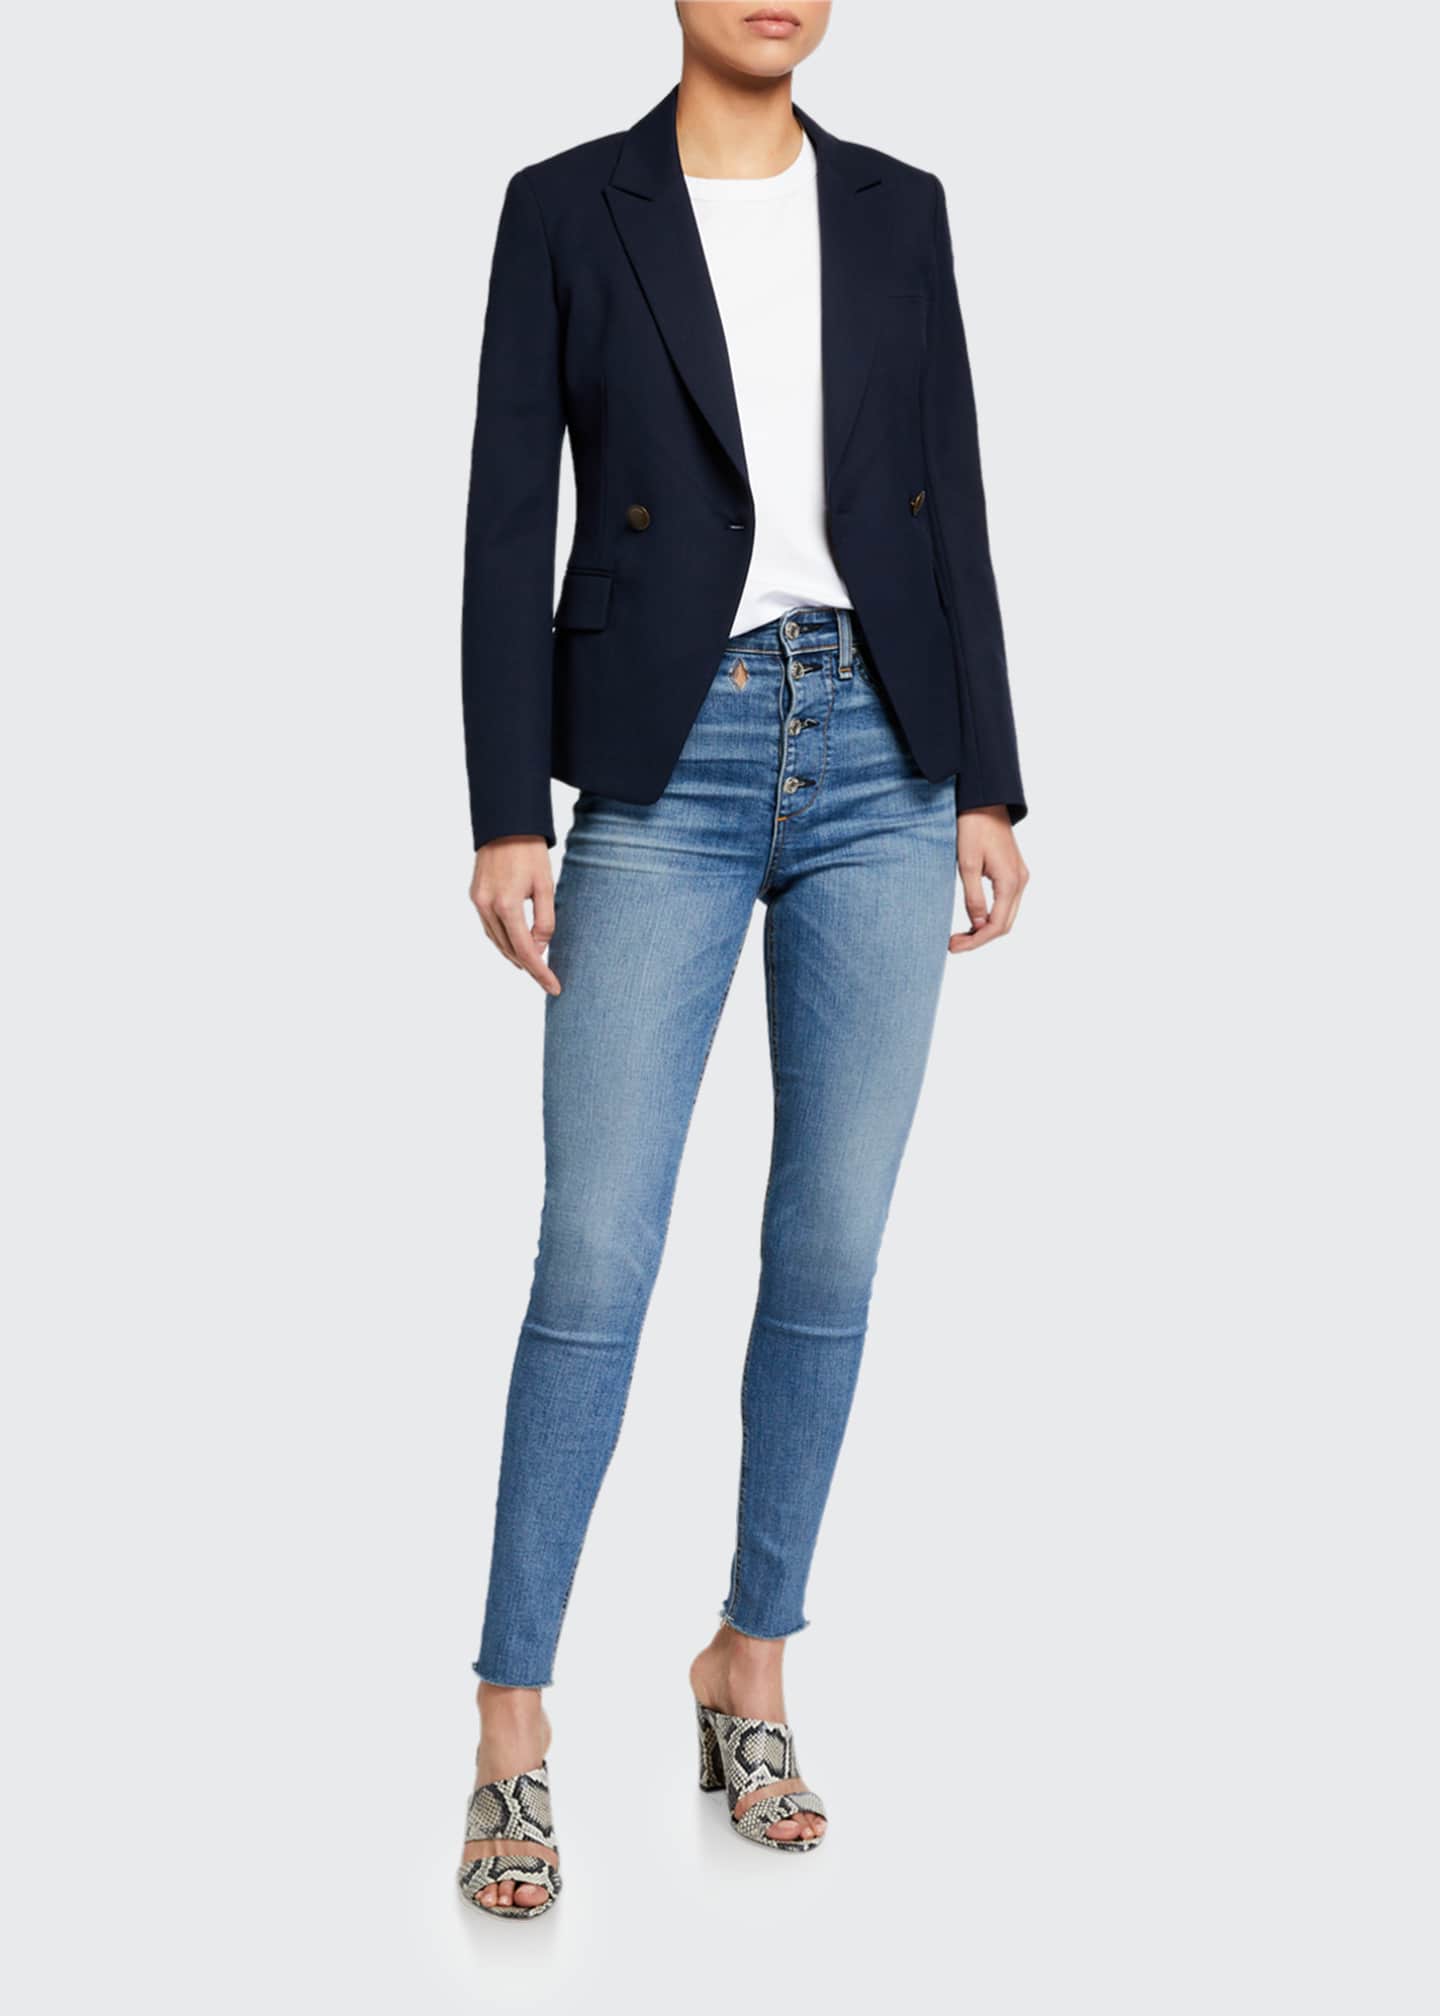 rag and bone button fly jeans